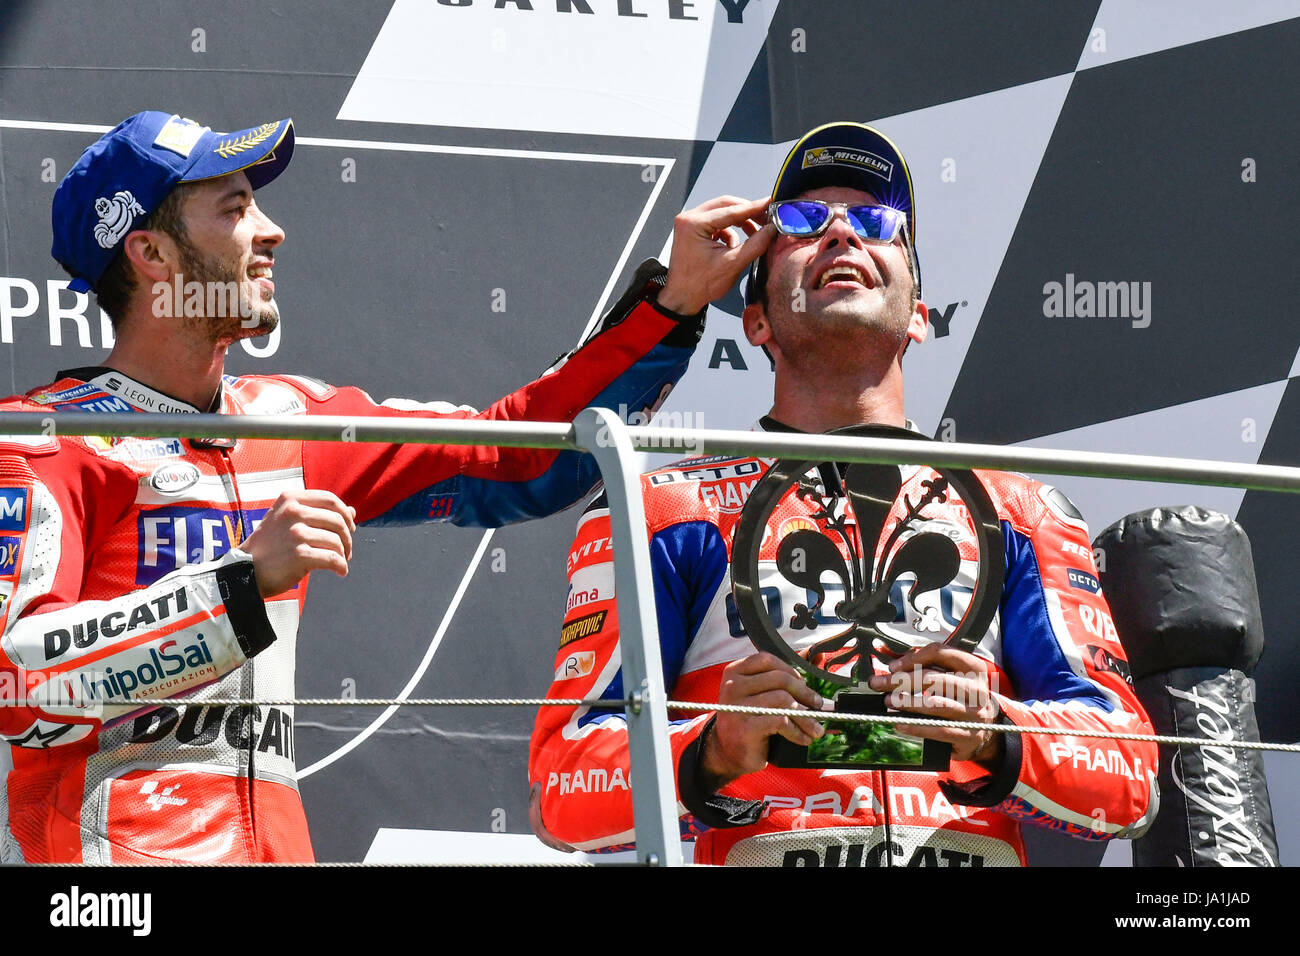 Florence, Italy. 04th June, 2017. SCARPERIA, FLORENCE, ITALY - JUNE 04:, 2017 Andrea Dovizioso (L) of Italy and Ducati Team, and Danilo Petrucci (R) of Italy and OCTO Pramac Racing celebrates on the podium at the end race MotoGP during MotoGP Gran Premio d'Italia- at Mugello Circuit. on june 04, 2017 in Scarperia Italy. (Photo by Marco Iorio) Credit: marco iorio/Alamy Live News Stock Photo